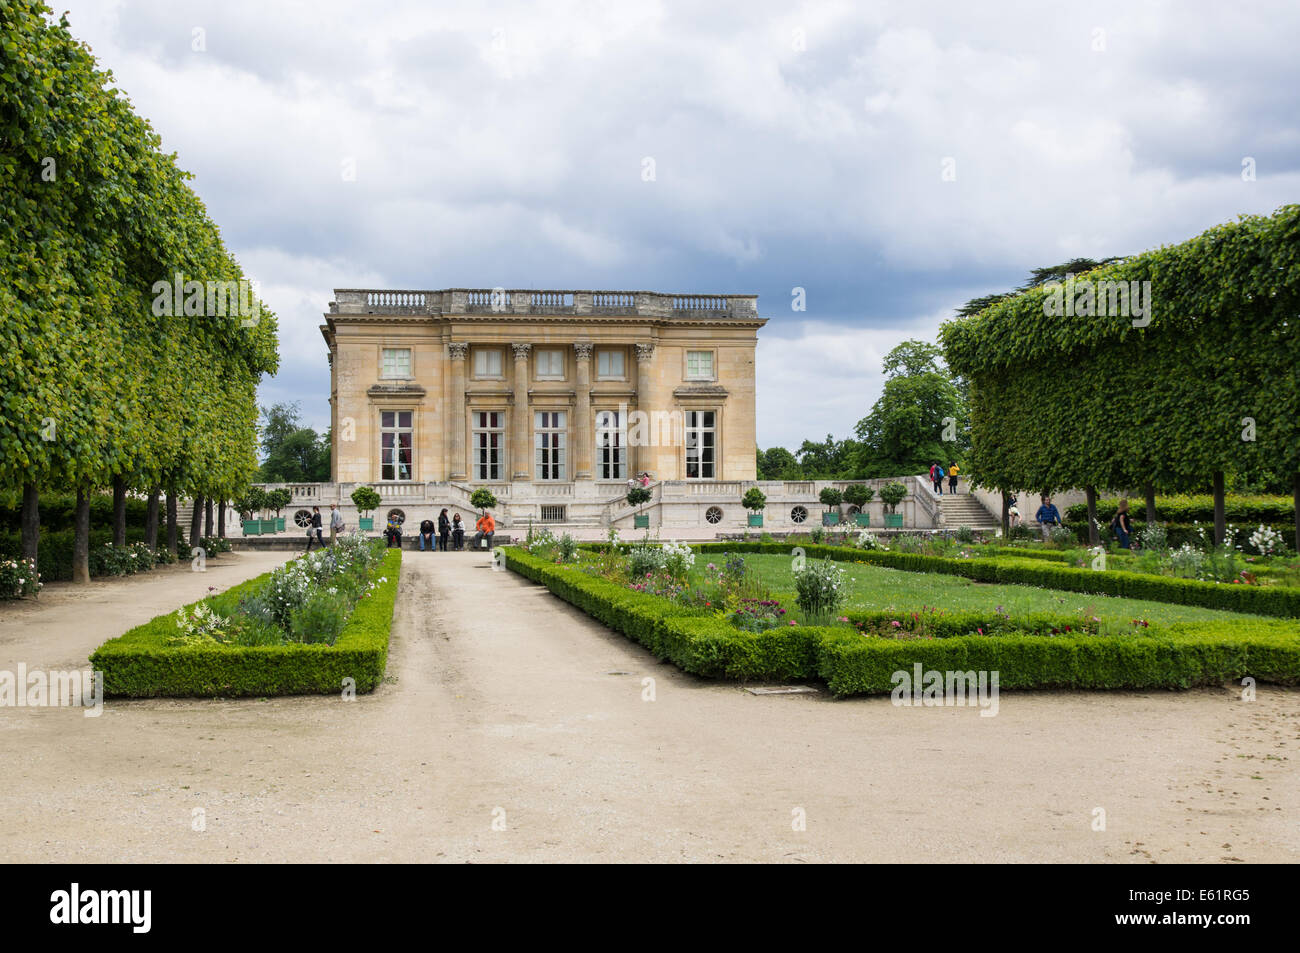 Petit Trianon chateau on the grounds of the Palace of Versailles, Chateau de Versailles in France Stock Photo